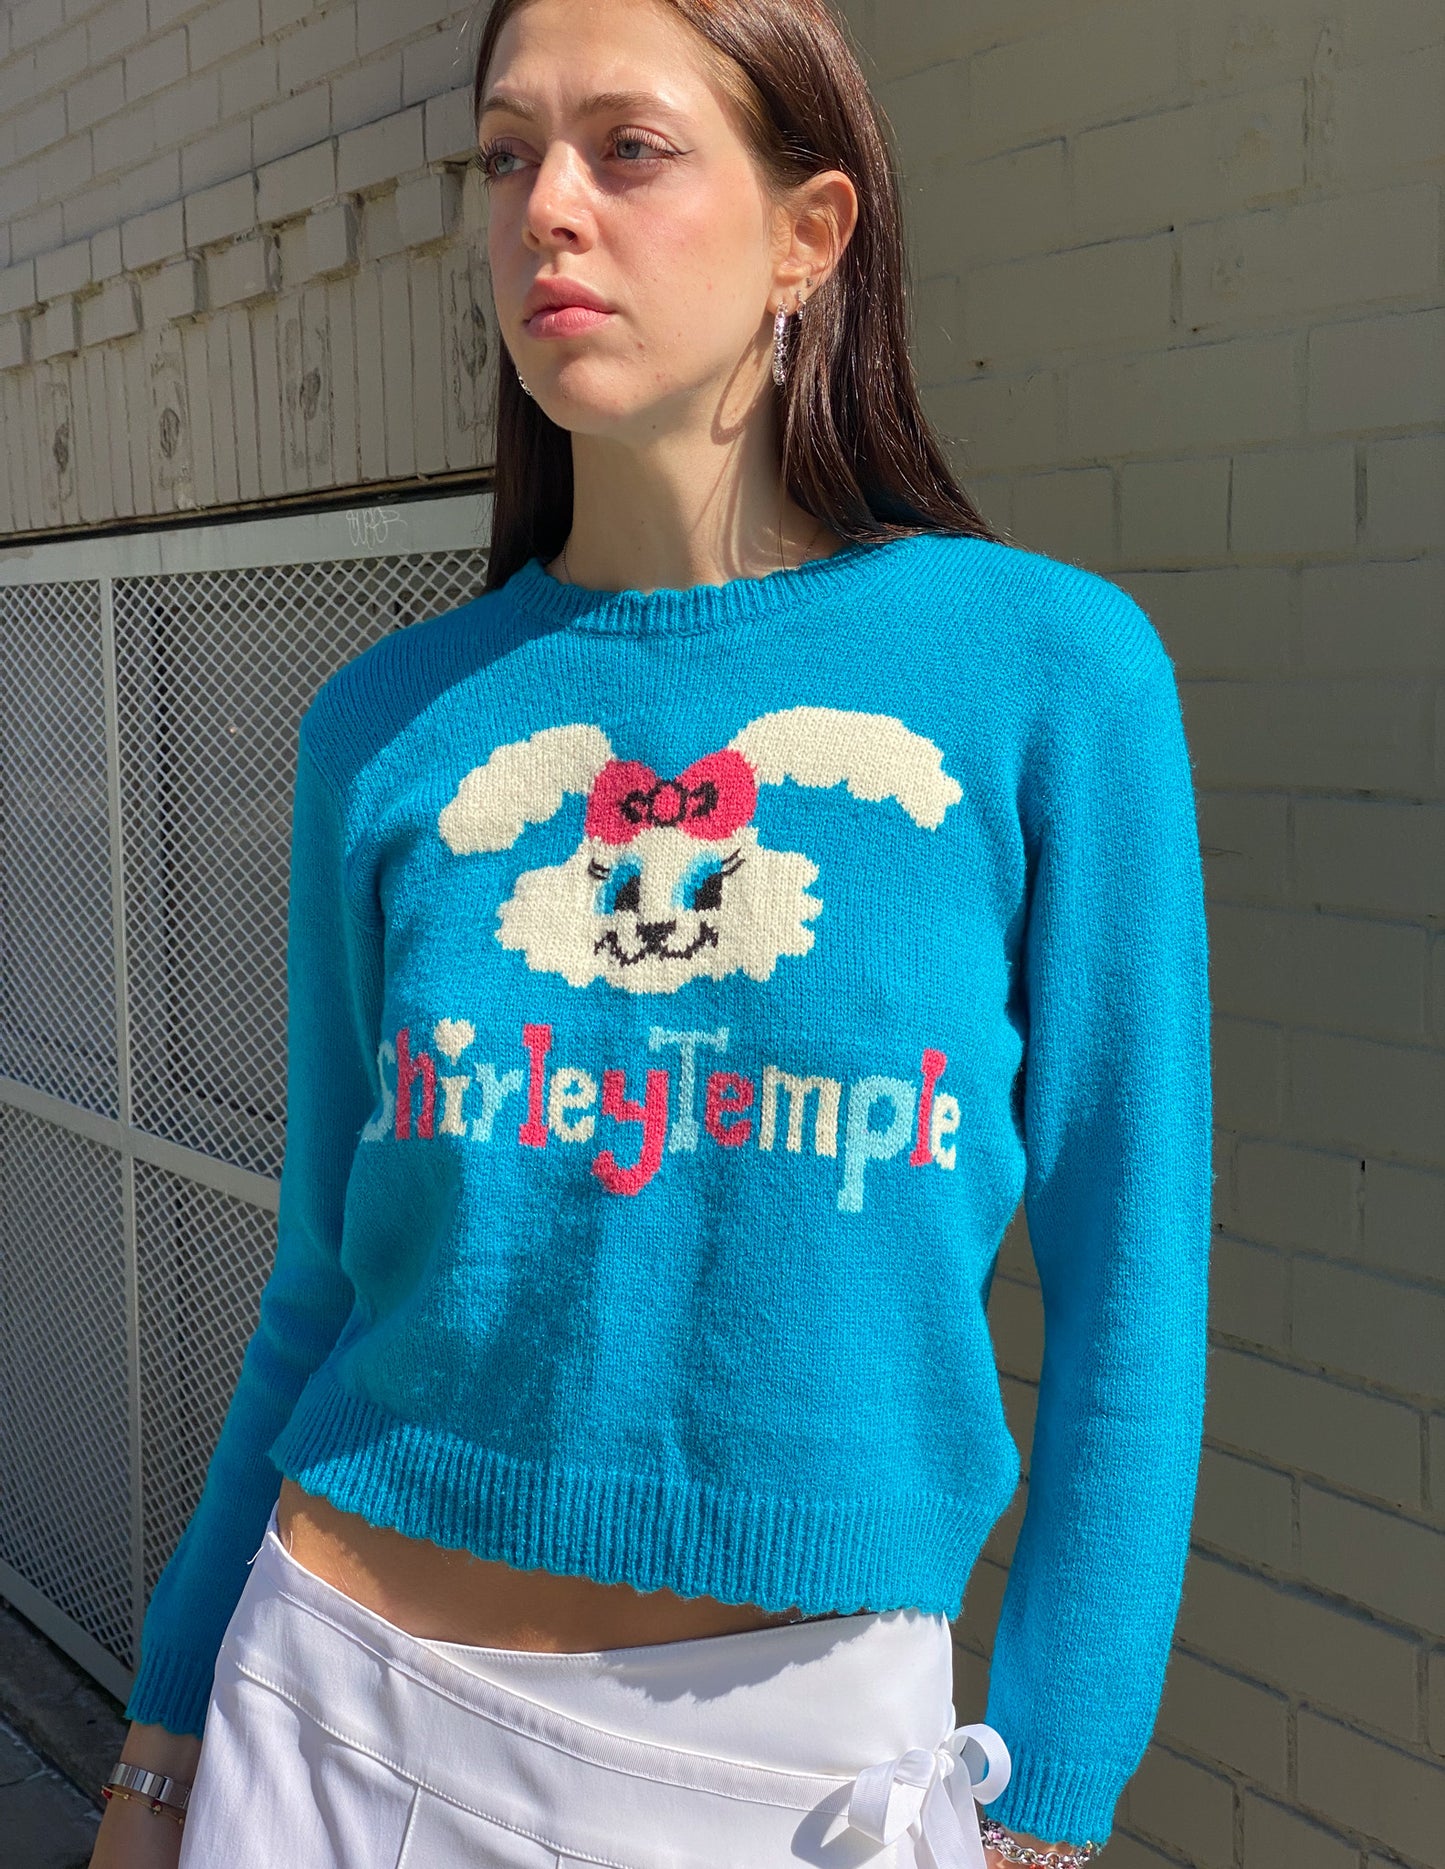 Vintage Japanese Shirley Temple Brand Sweater